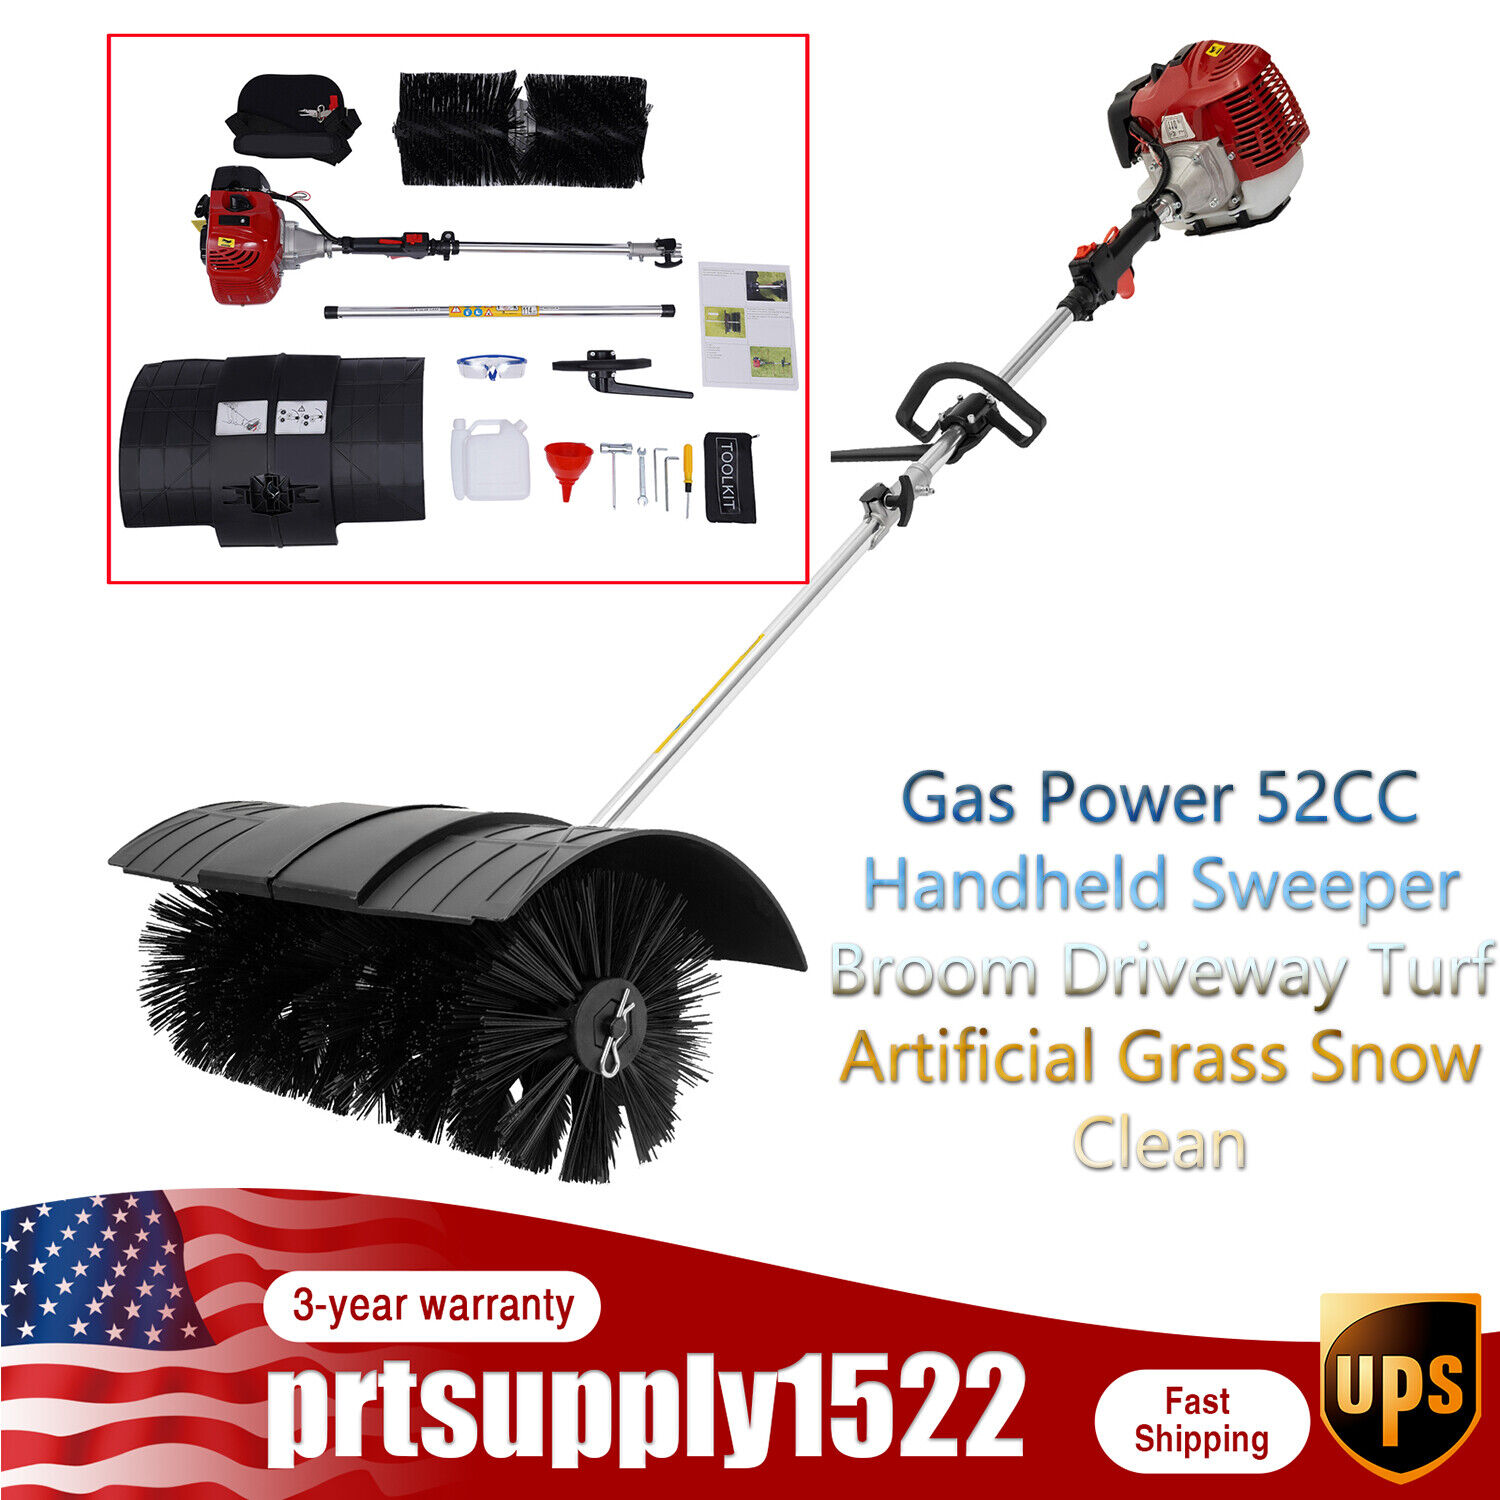 Gas Power 52CC Handheld Sweeper Broom Driveway Turf Artificial Grass Snow Clean